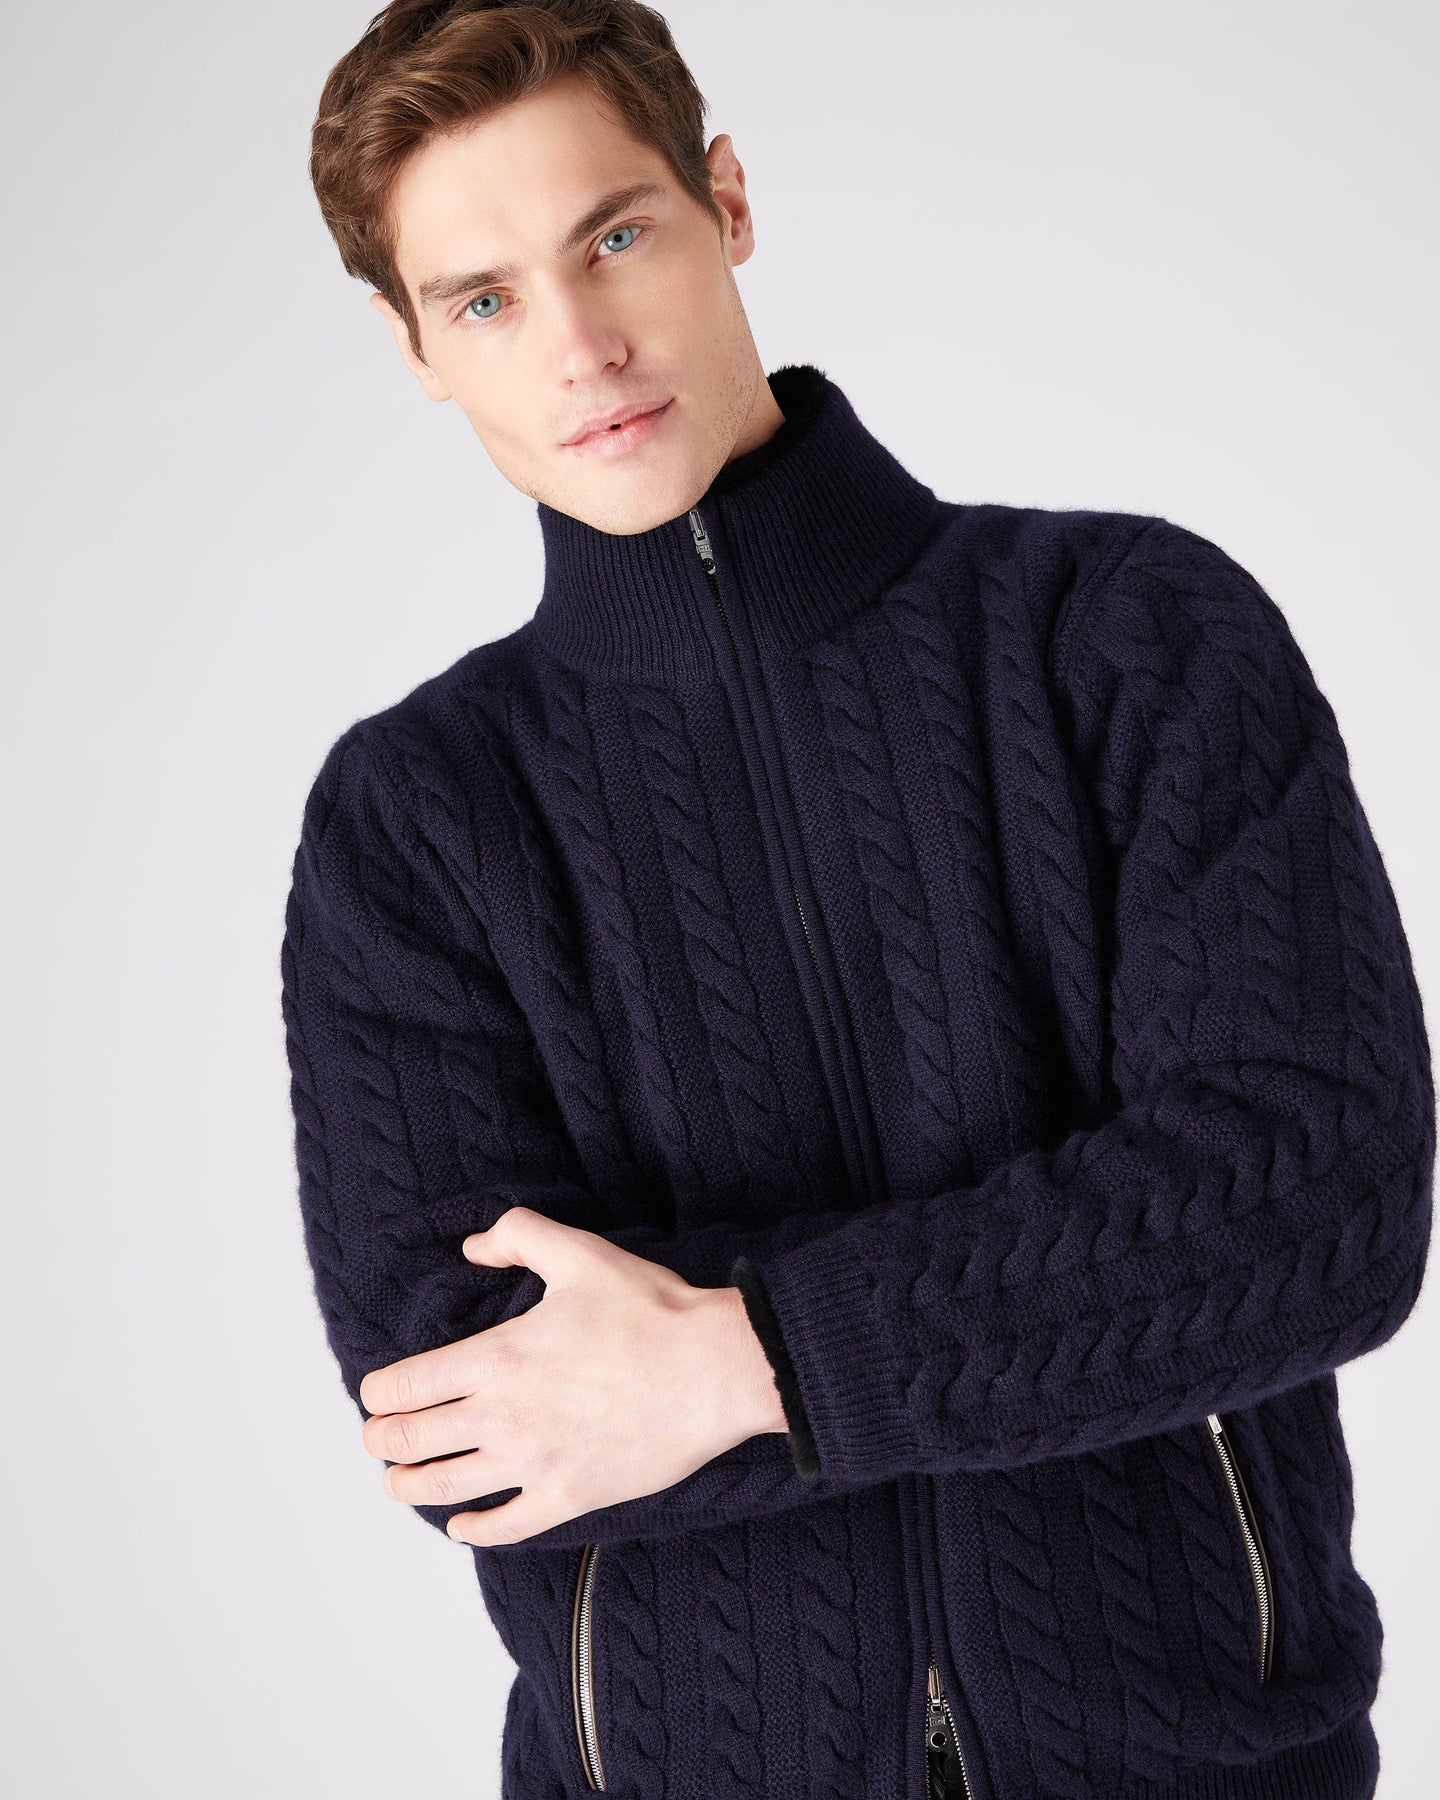 N.Peal Men's Fur Lined Cable Cardigan